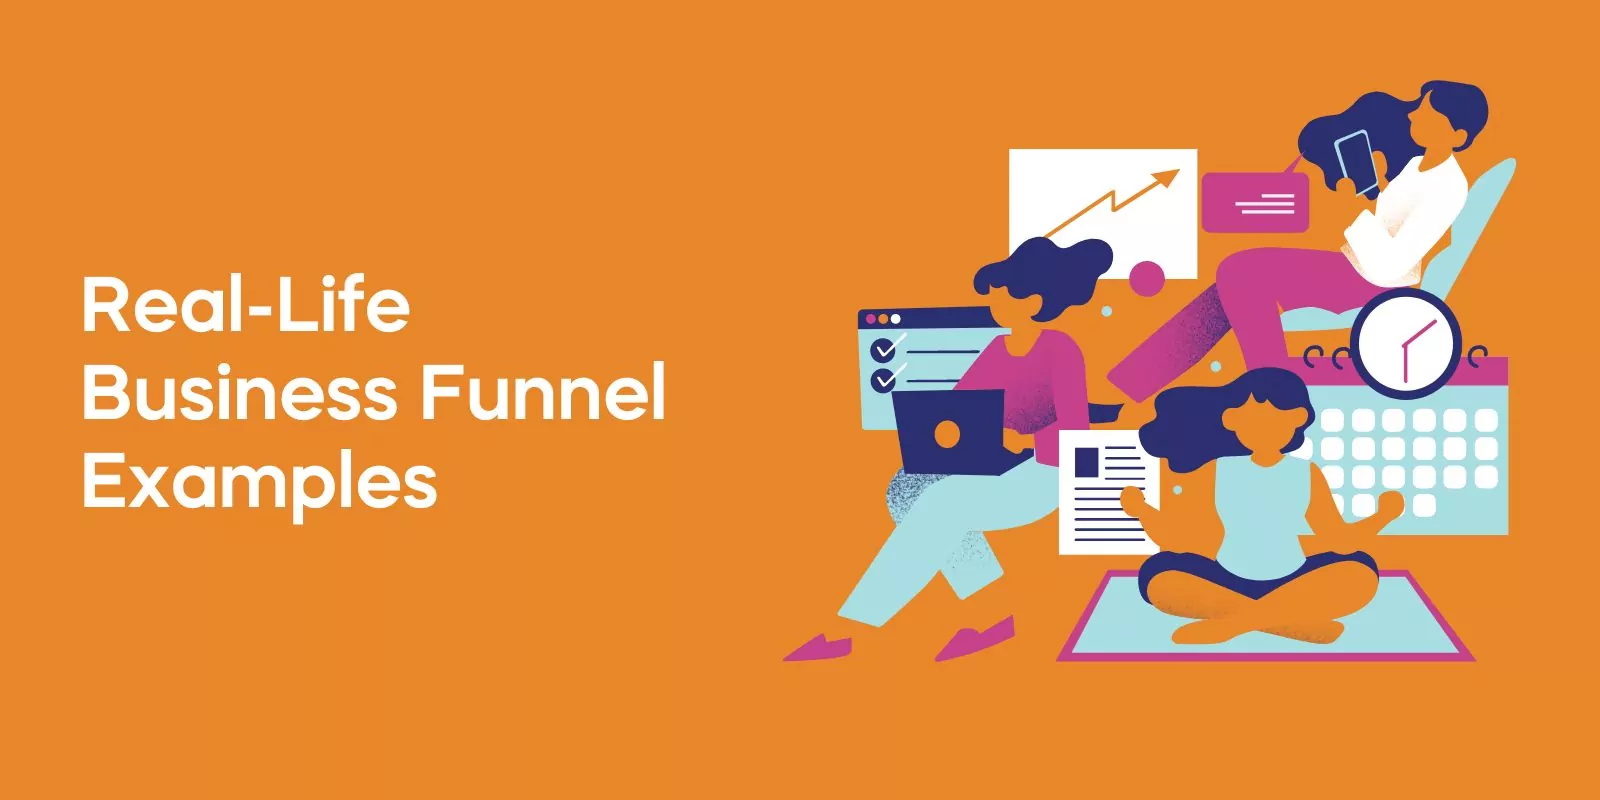 Real-Life Business Funnel Examples